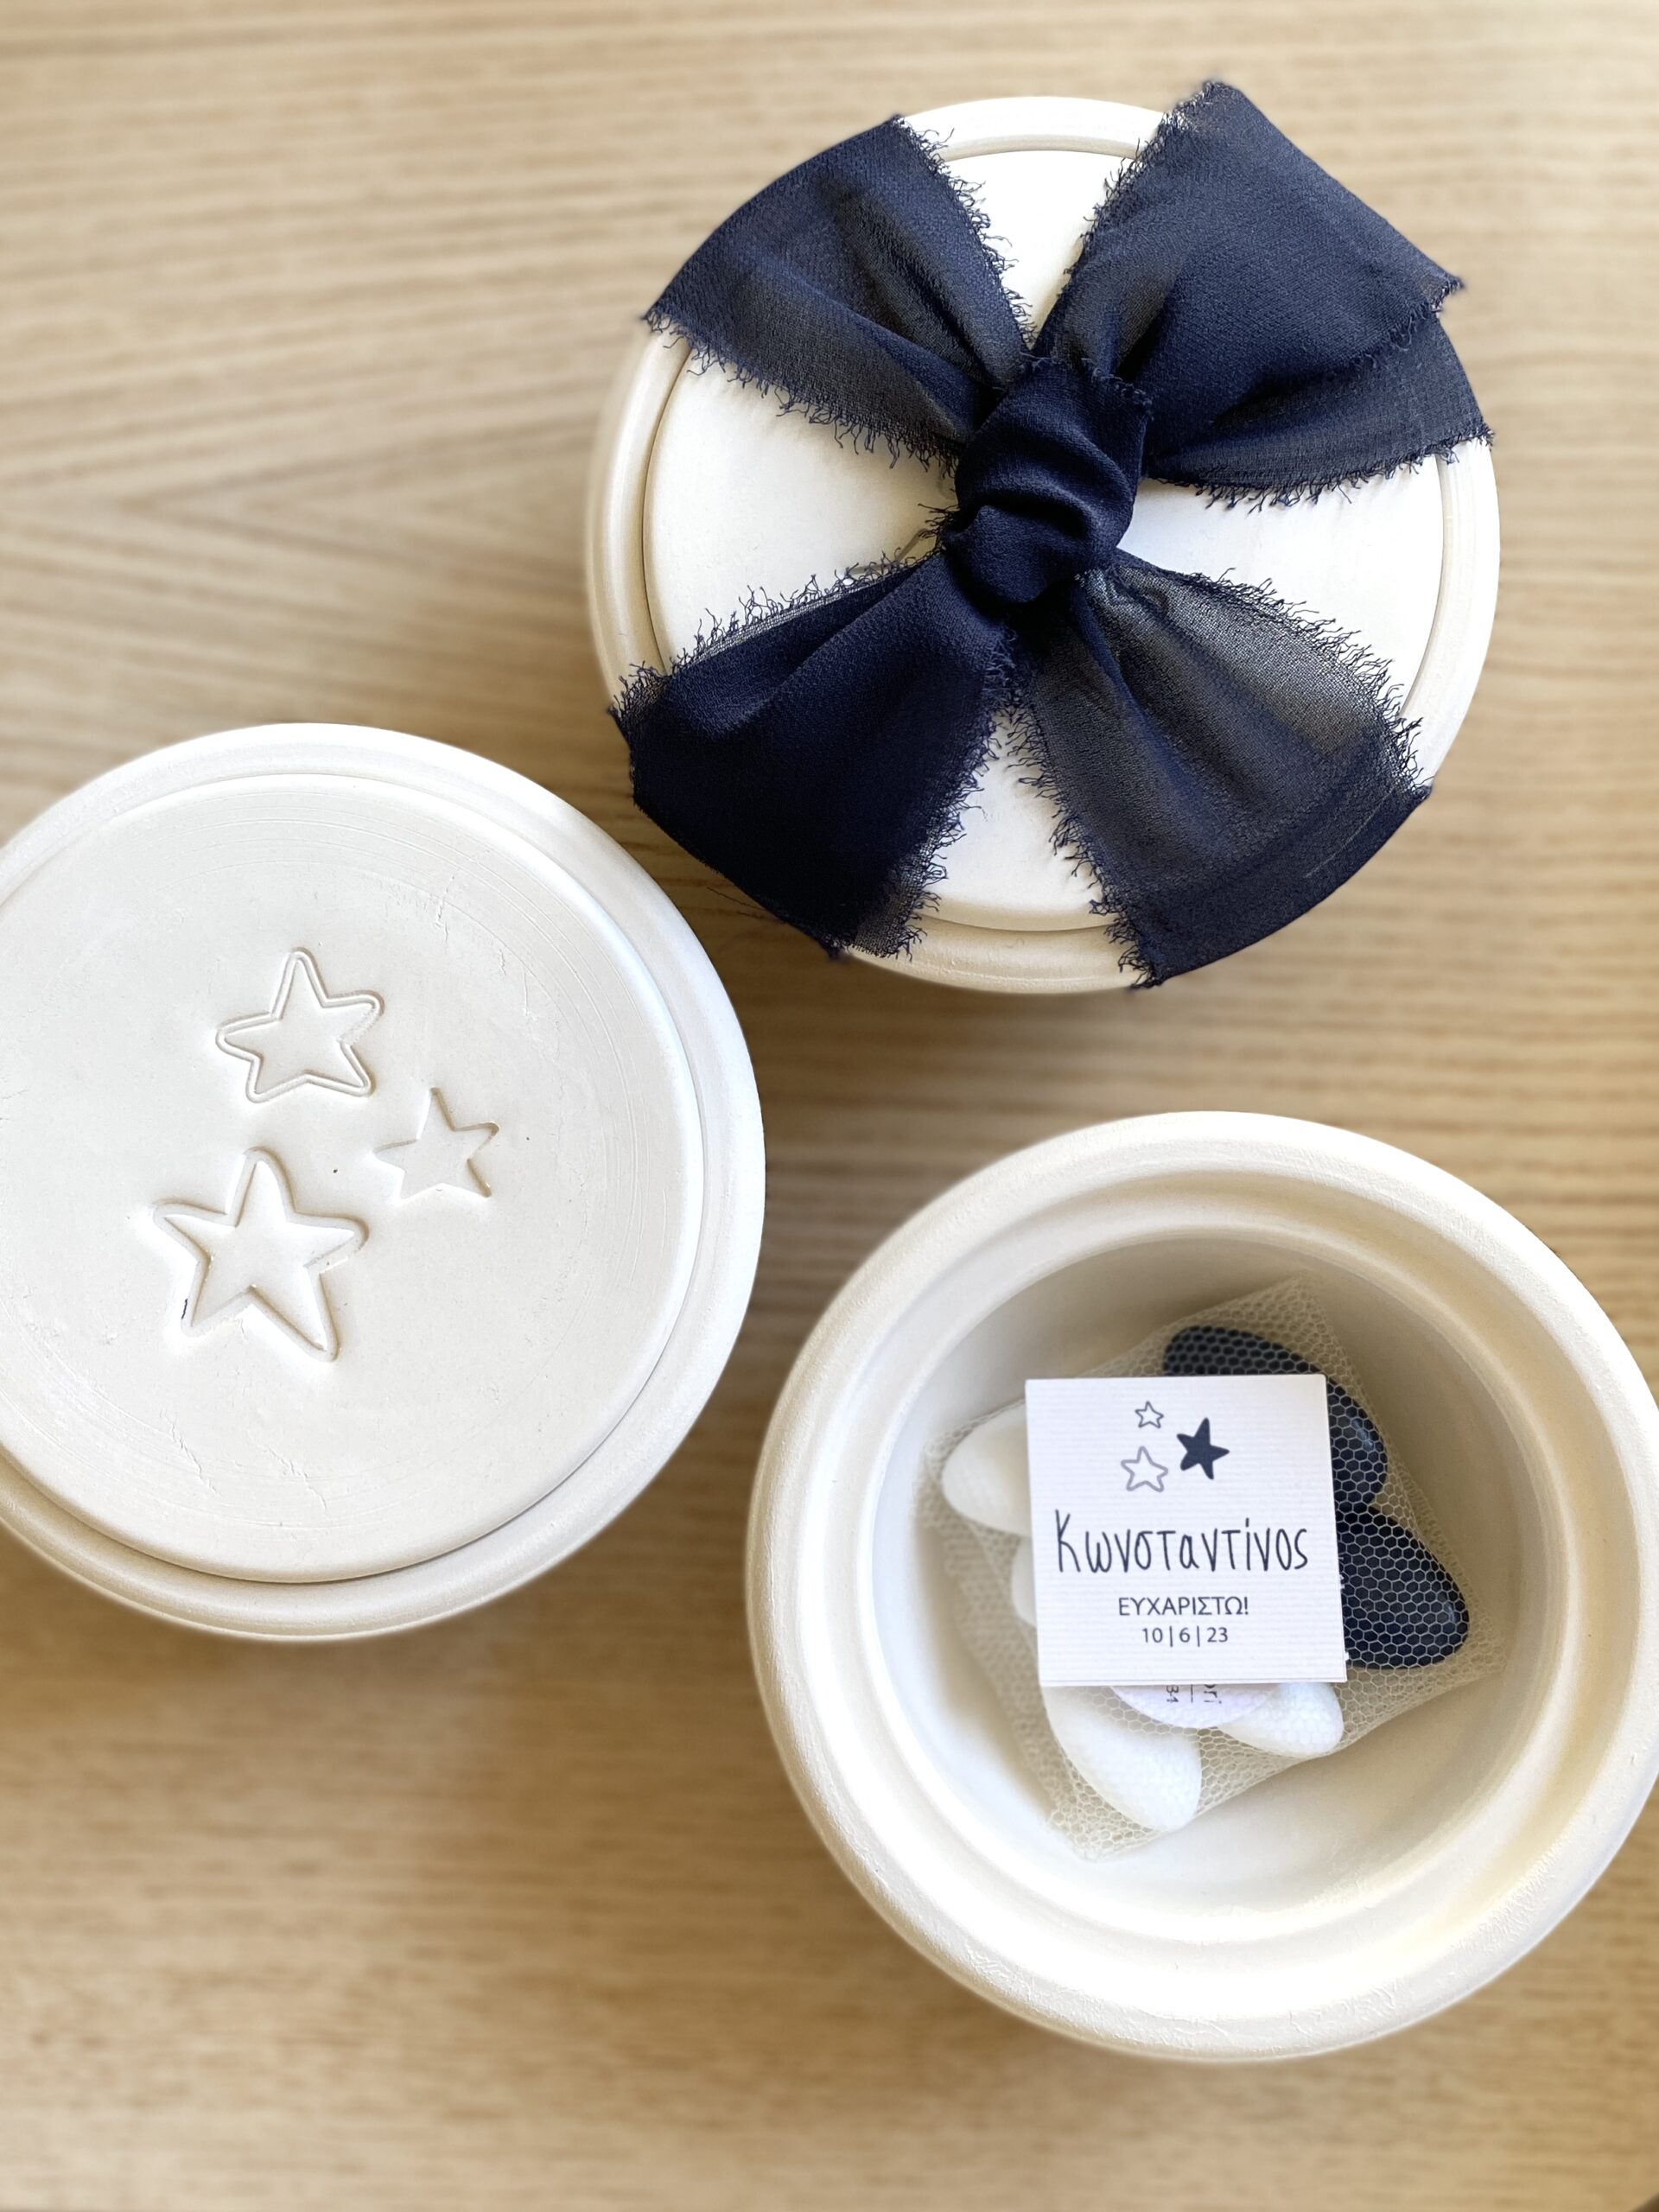 twinkle-twinkle-little-star-baptism-ceramic-favors-bowl-with-mouselin-ribbon